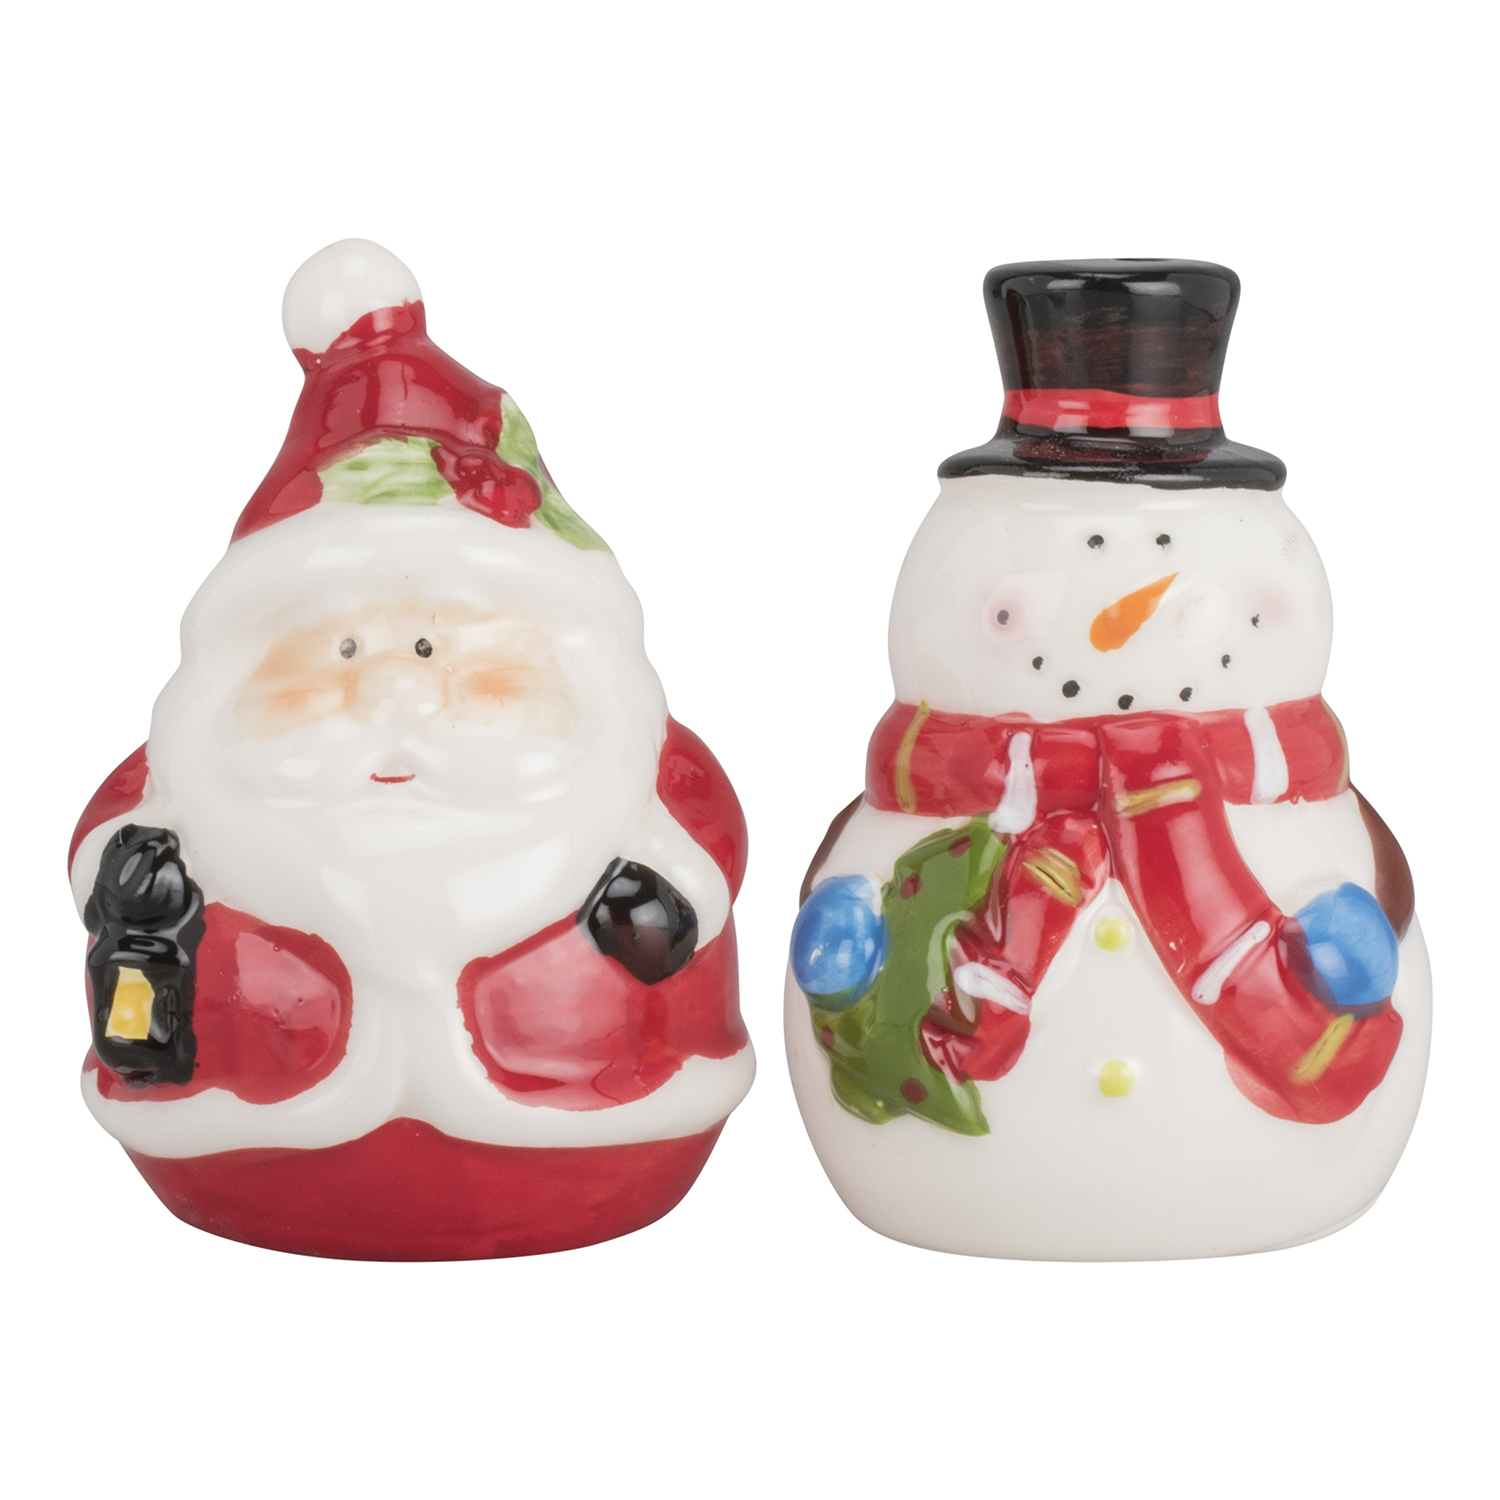 Snowman And Santa Salt And Pepper Image 2